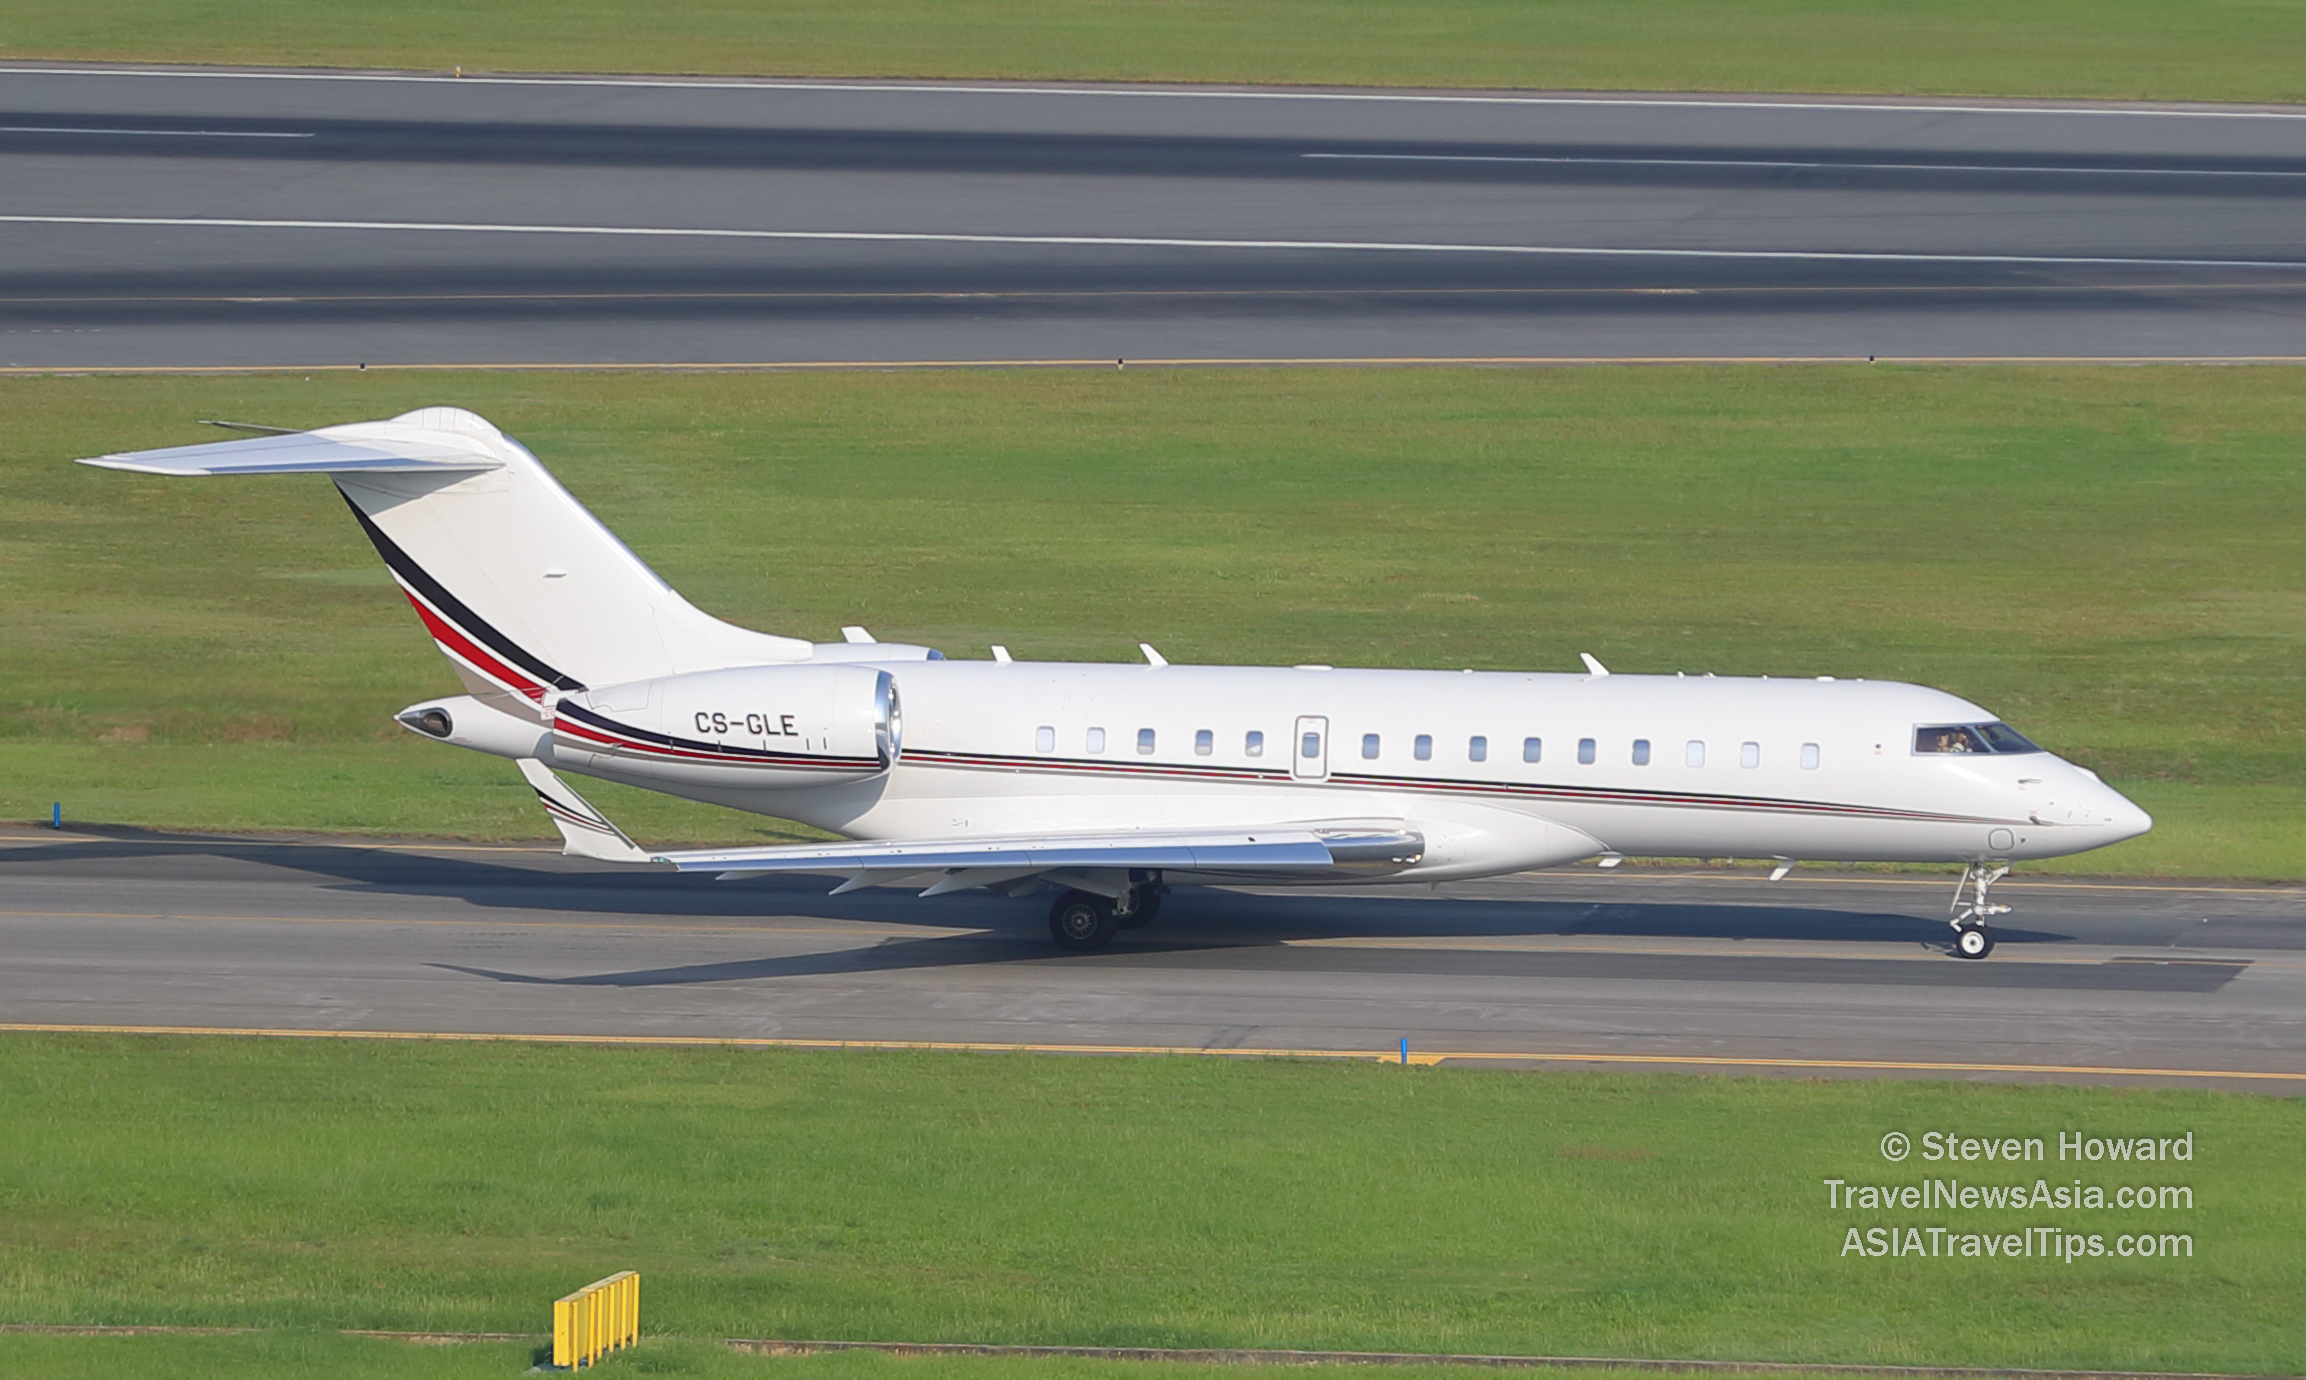 Bombardier Global 6000 reg: CS-GLE. Picture by Steven Howard of TravelNewsAsia.com Click to enlarge.